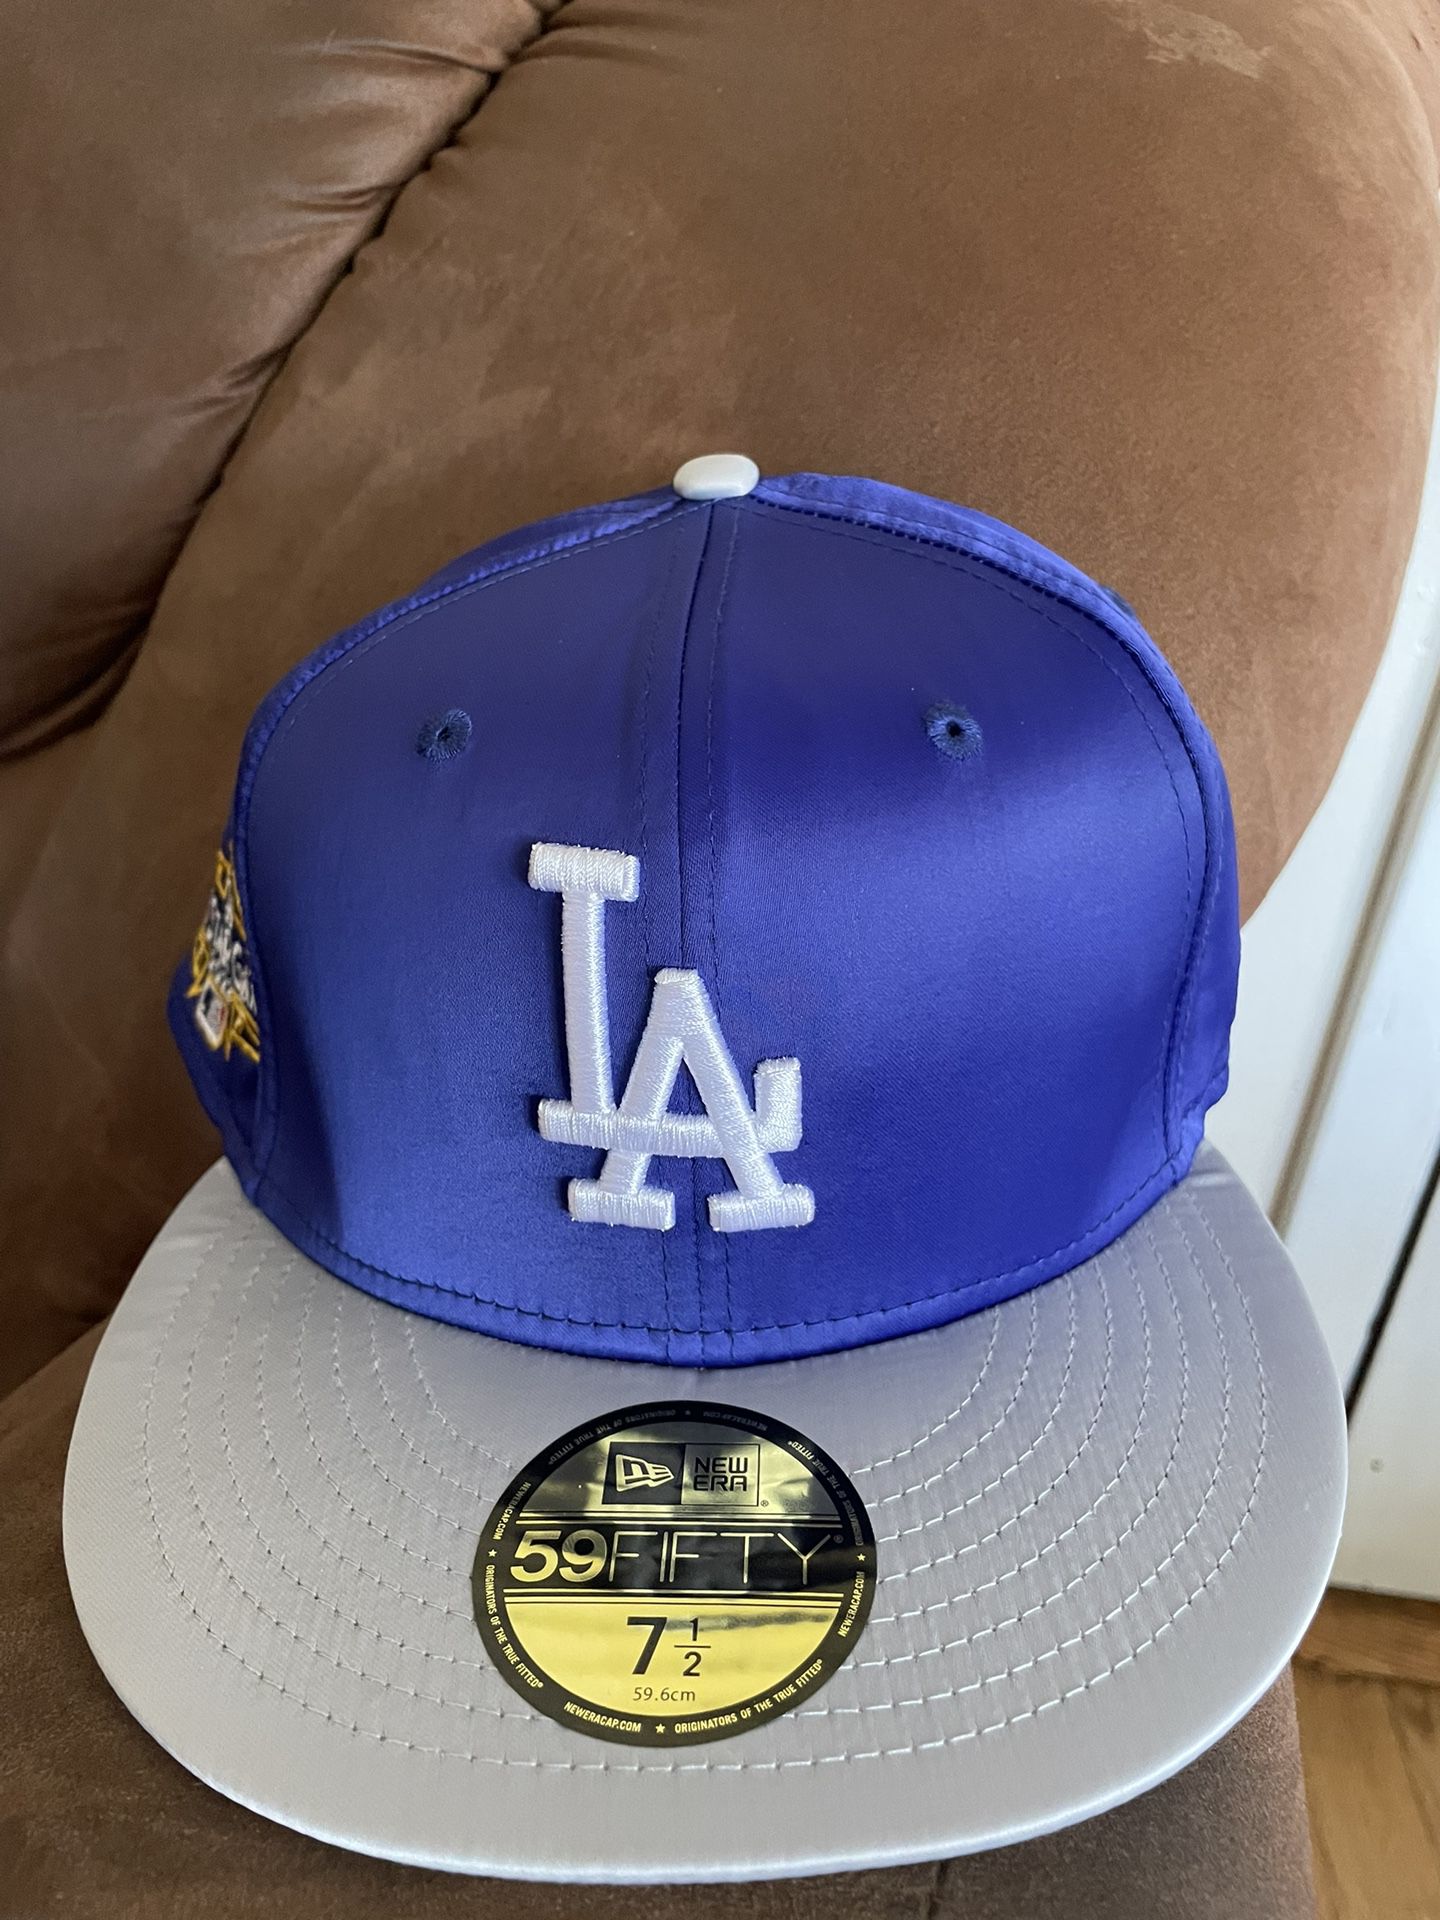 Los Angeles Dodgers New Era MLB ASG Fitted Hat 7 1/2 